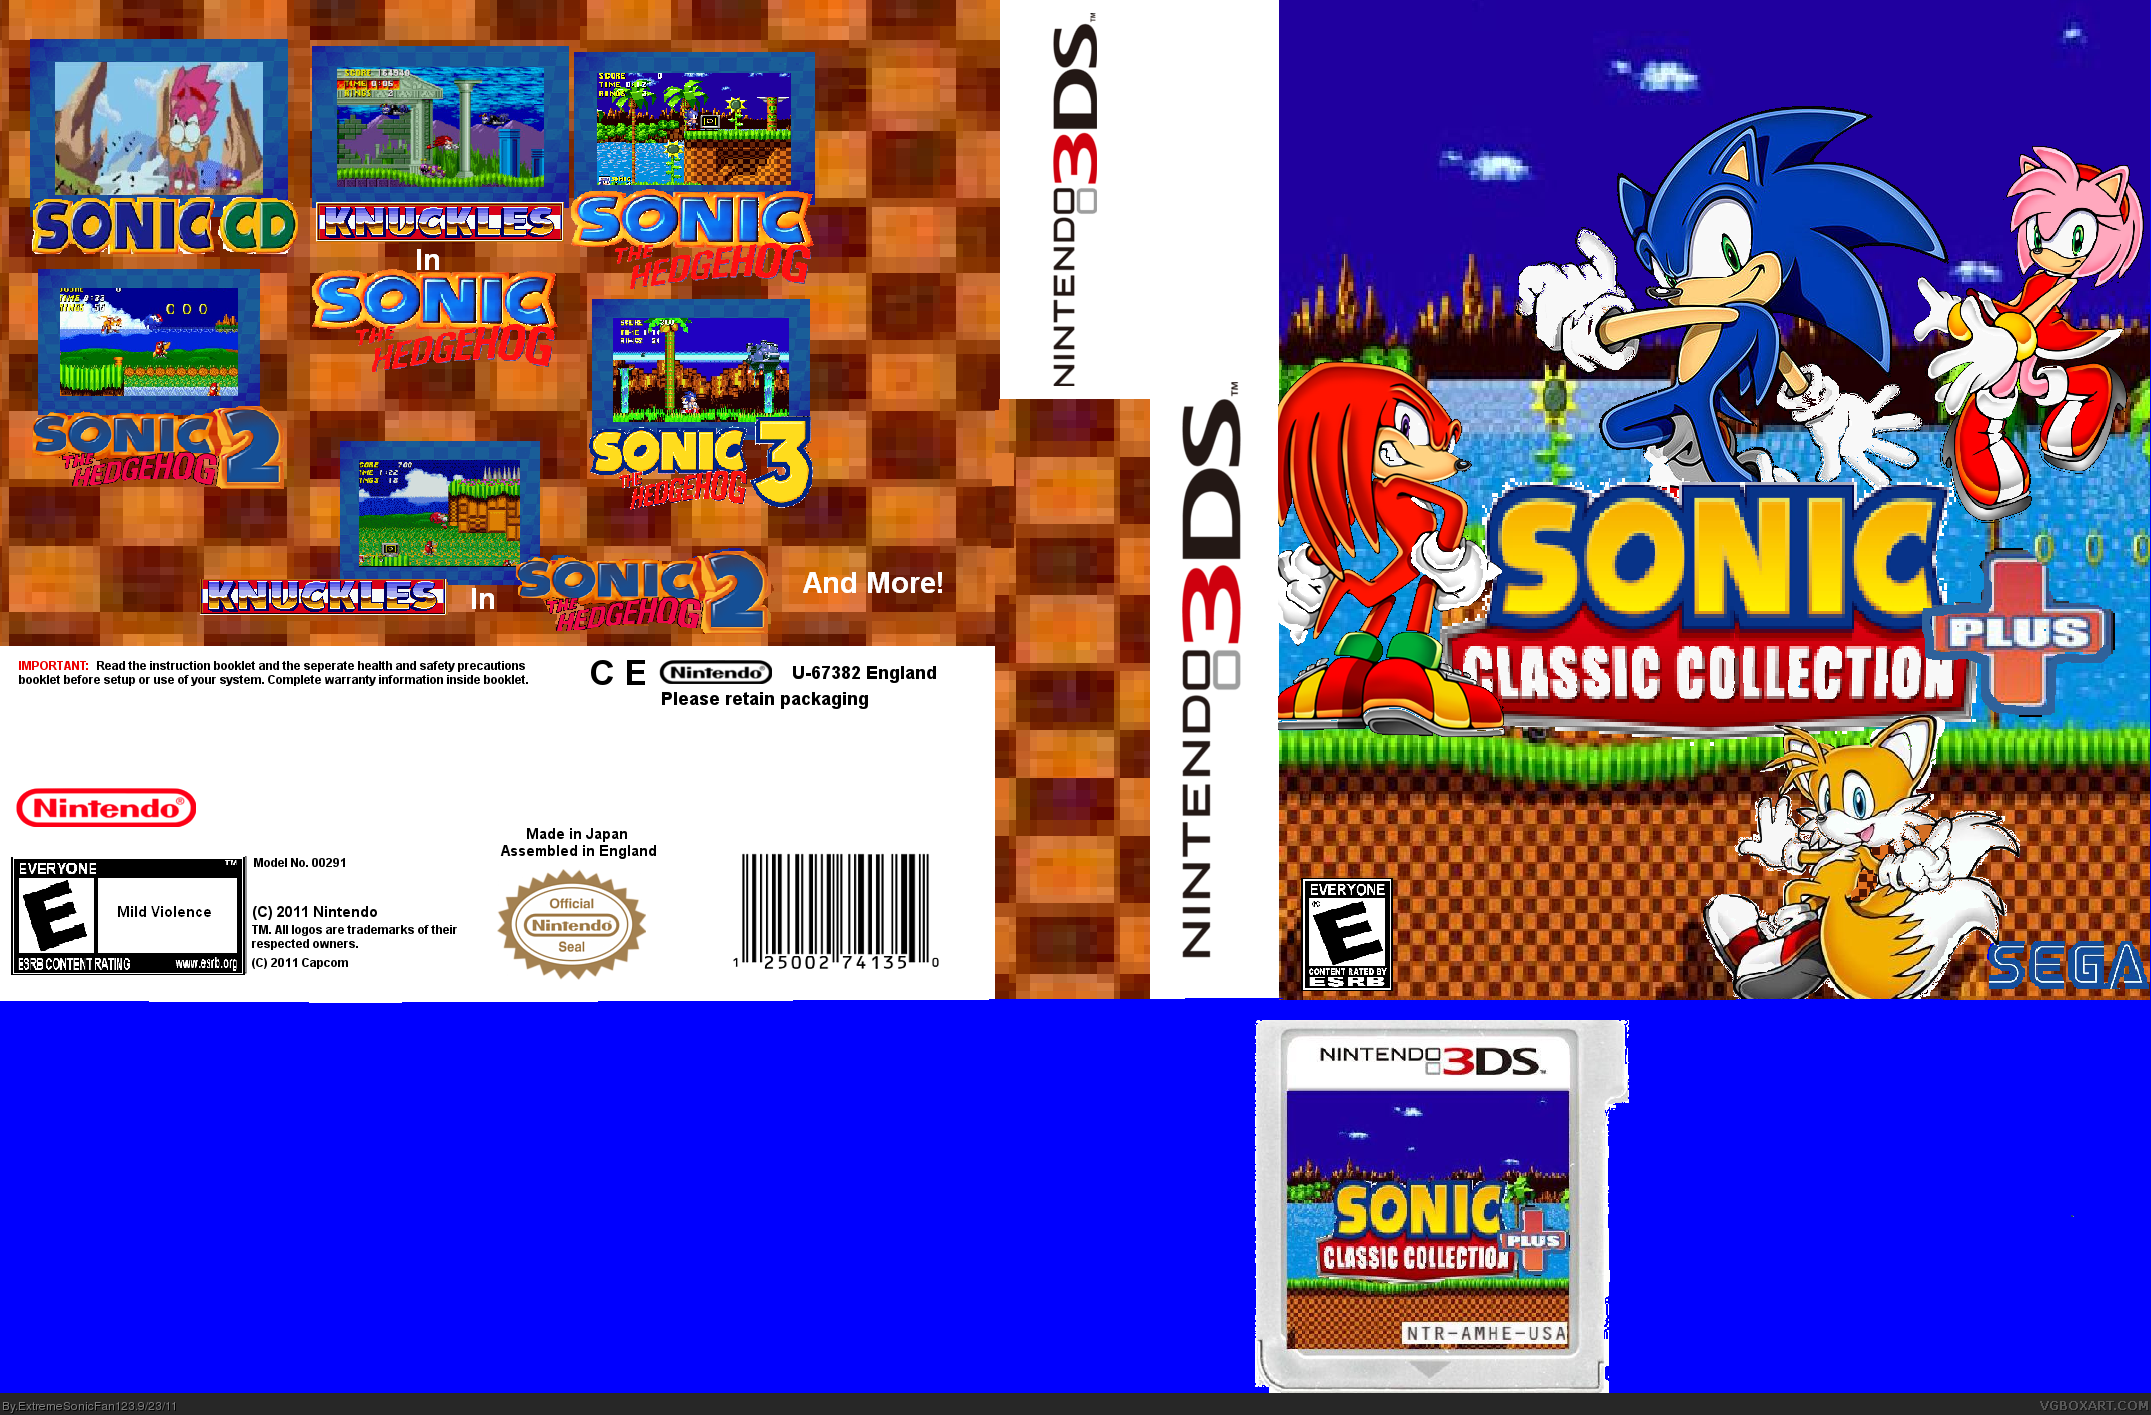 Sonic Classic Collection Plus box cover